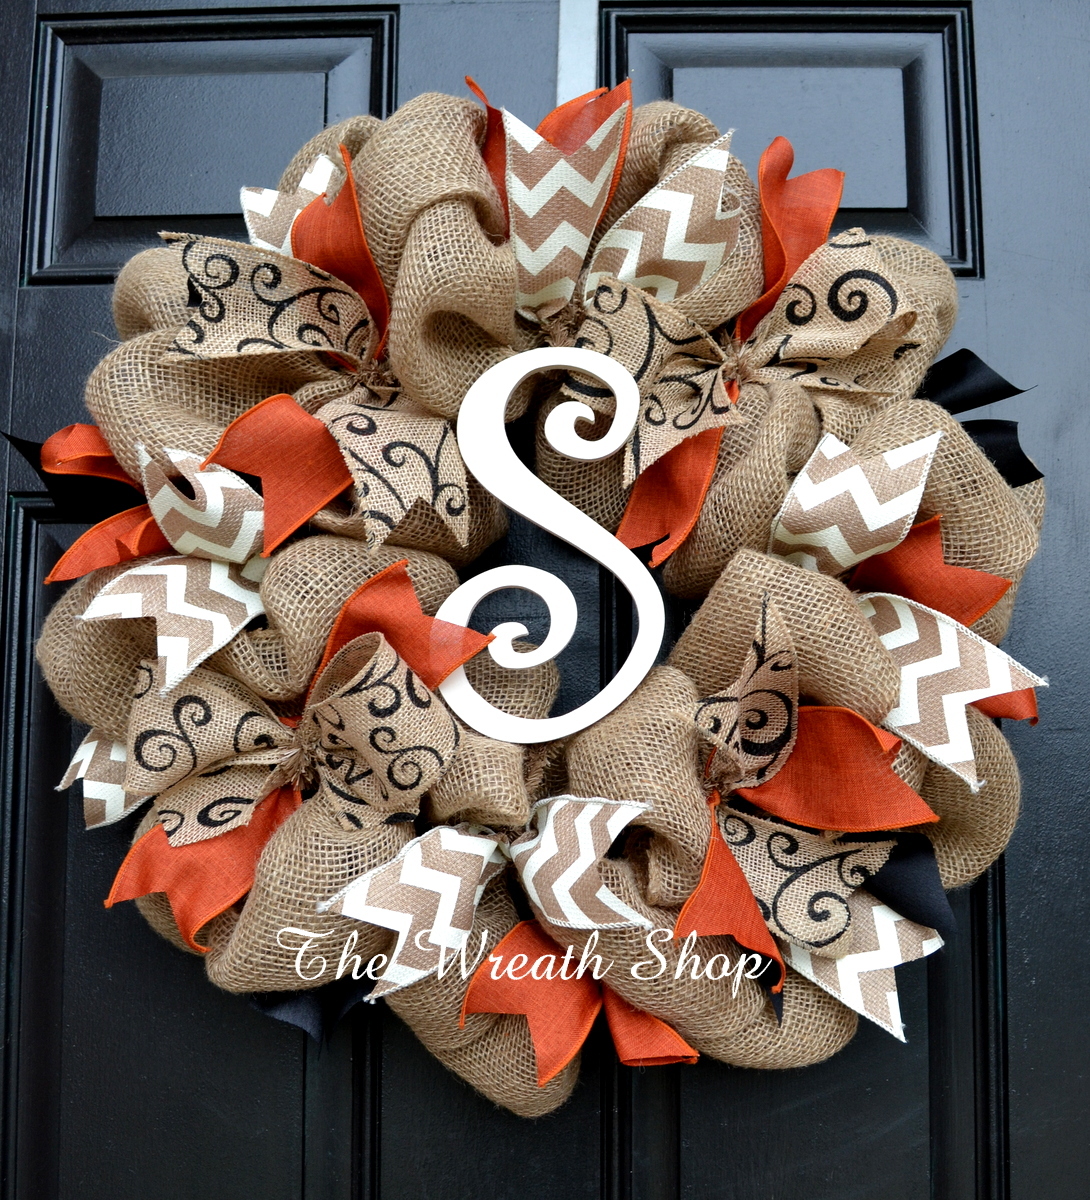 Burlap is one of fall's most versatile supplies, and it adds rustic appeal to DIY project. Perfect for wreaths!